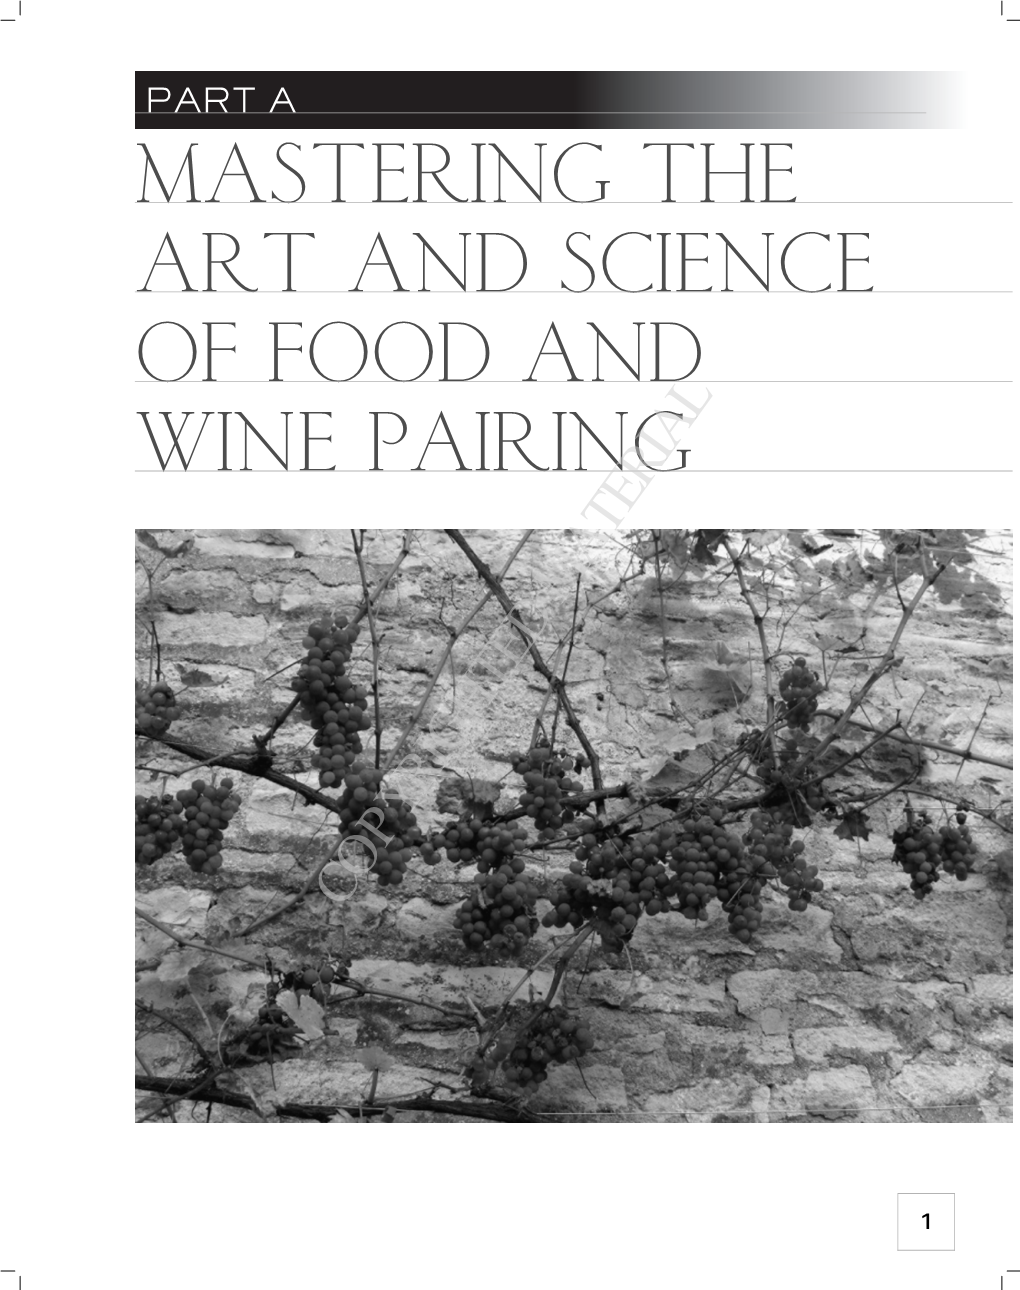 Mastering the Art and Science of Food and Wine Pairing